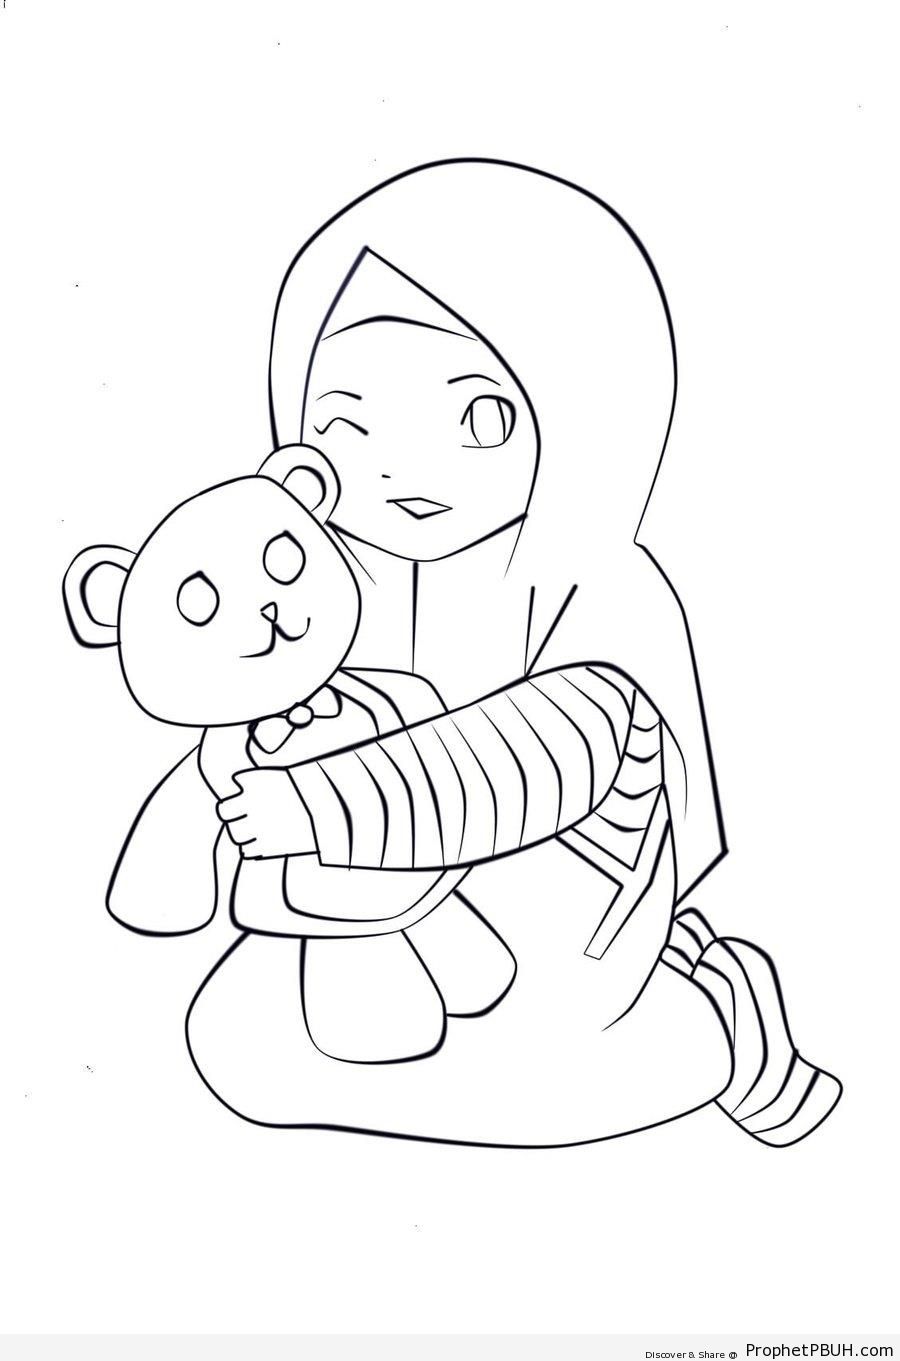 Girl and Teddy - Drawings 